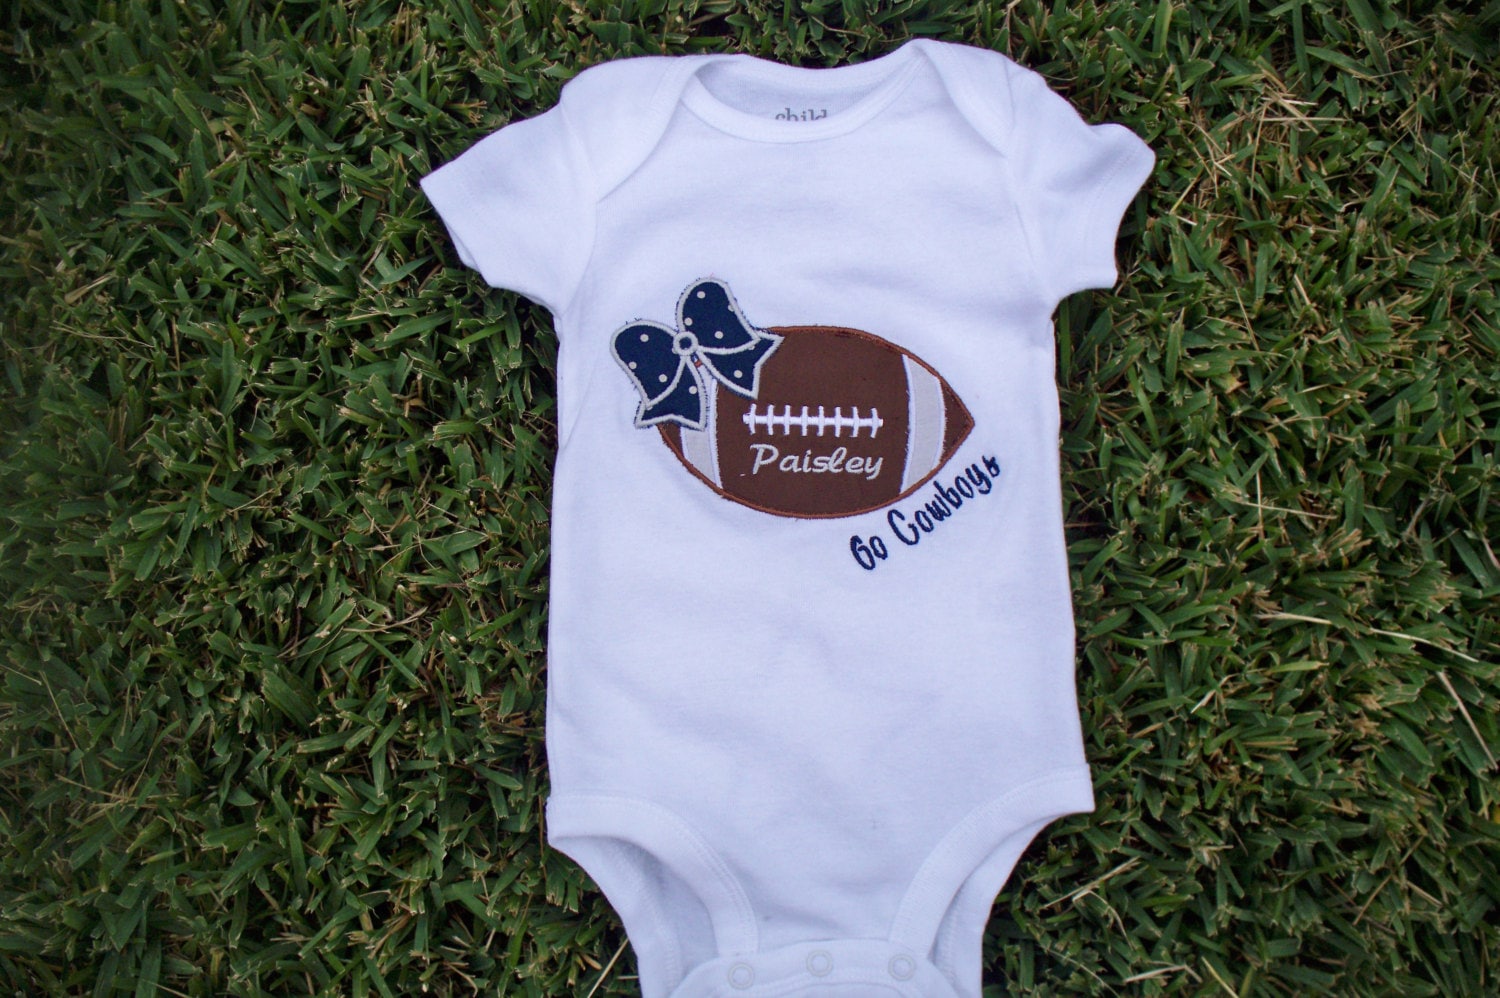 Dallas cowboys onesie for your little girl by simplystitched4you